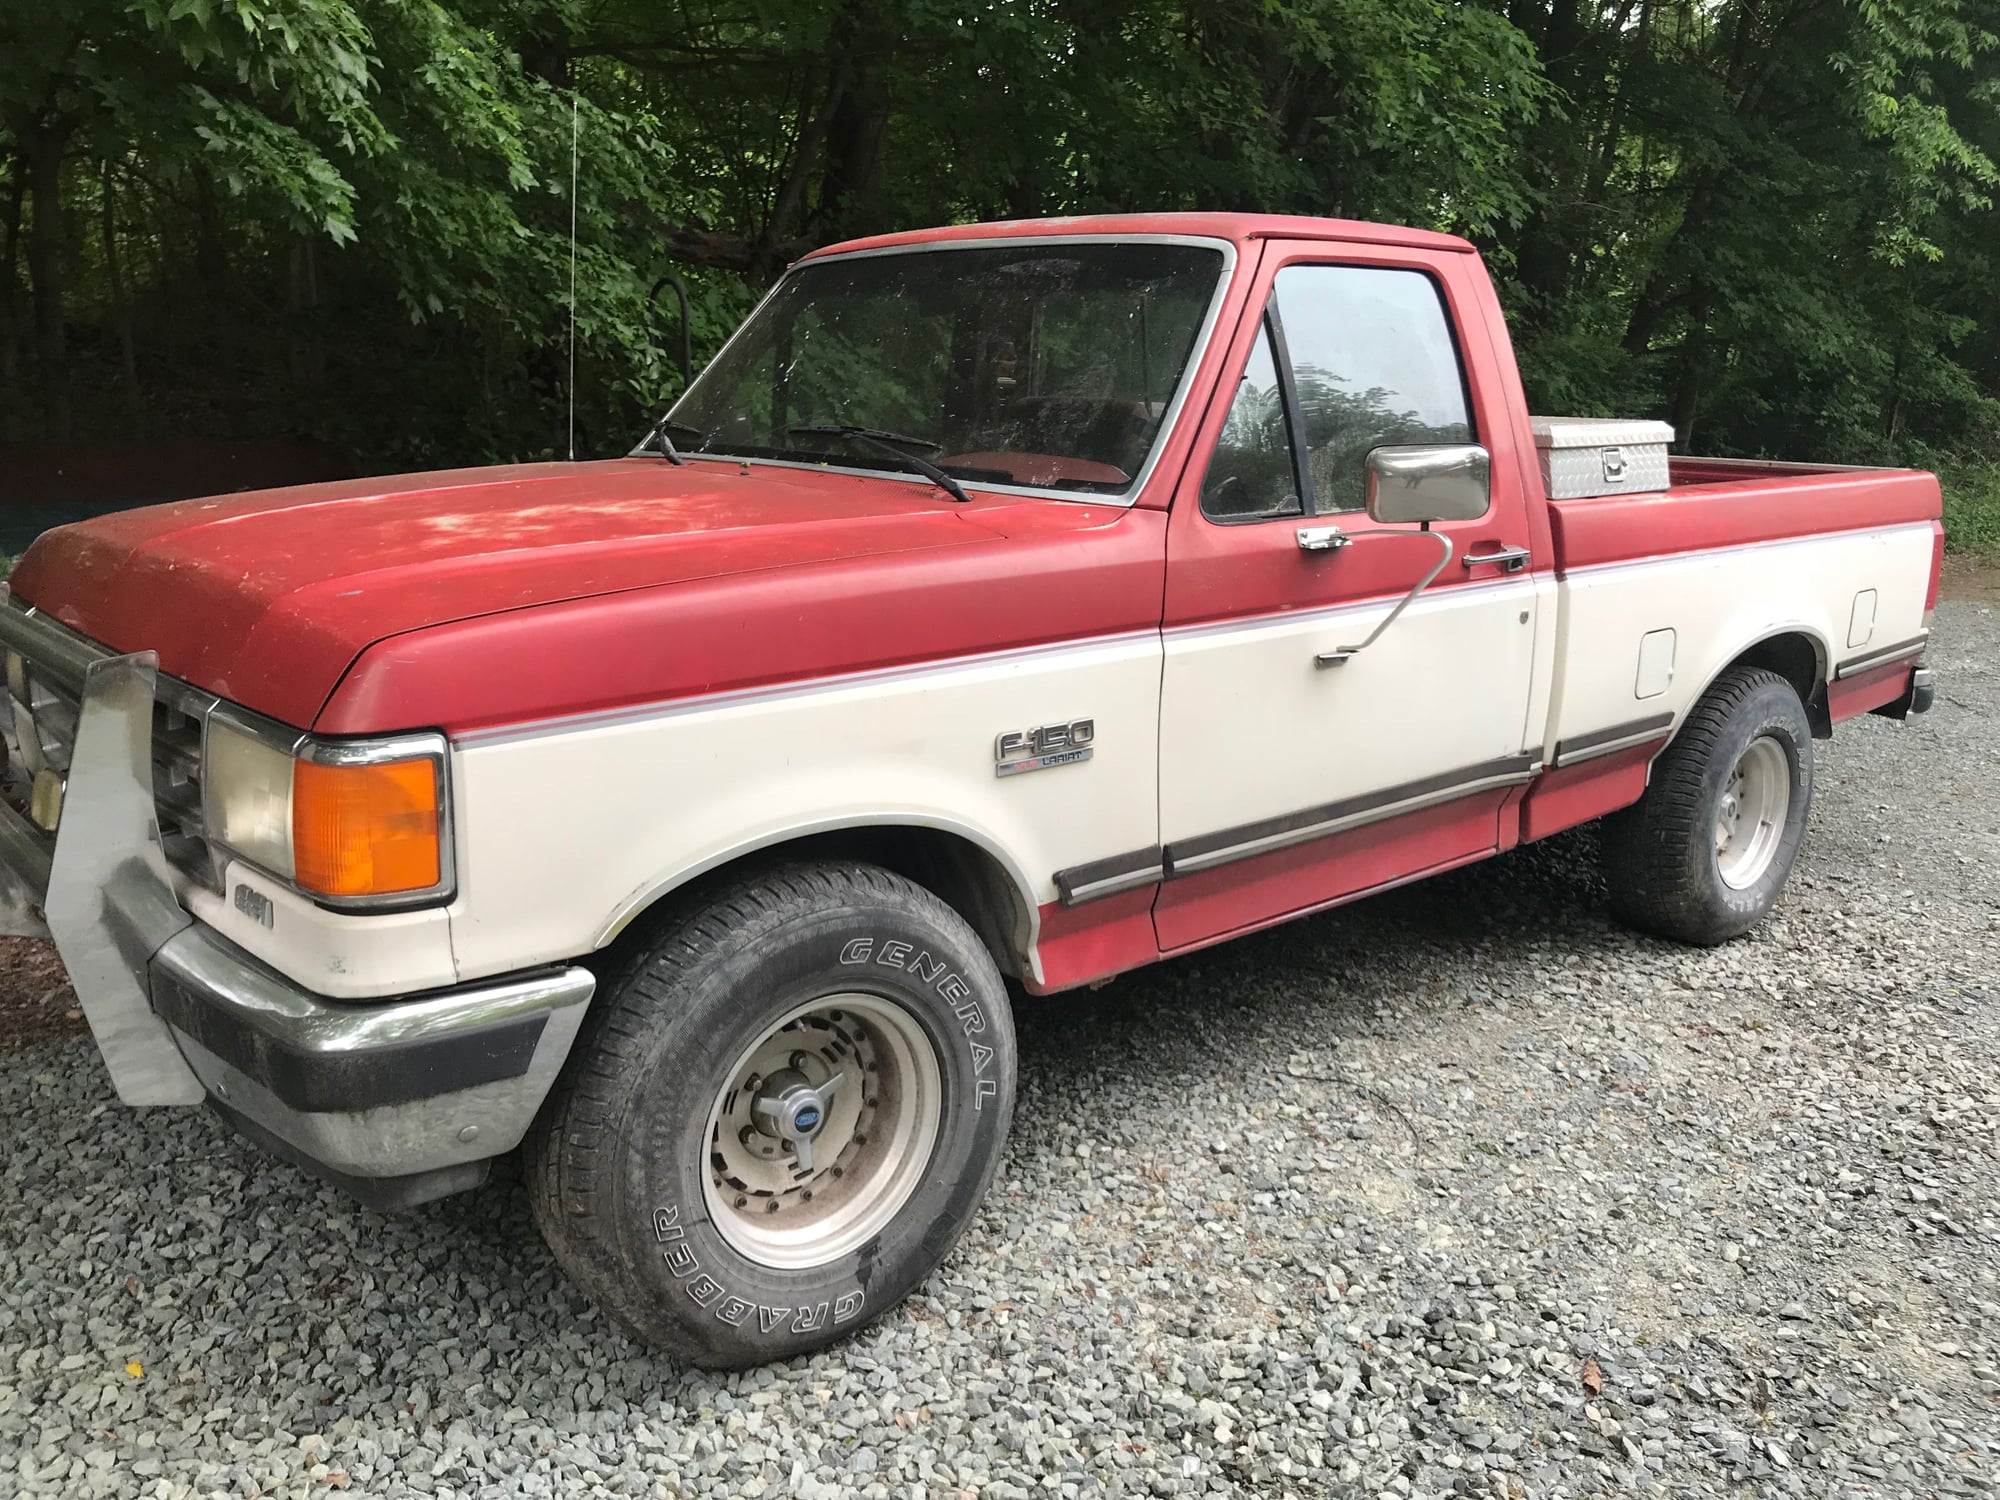 1988 Ford F-150 - Parts - Used - VIN 1FTDF15H5JNA01167 - 89,356 Miles - 8 cyl - 2WD - Automatic - Truck - Red - Chapel Hill, NC 27517, United States